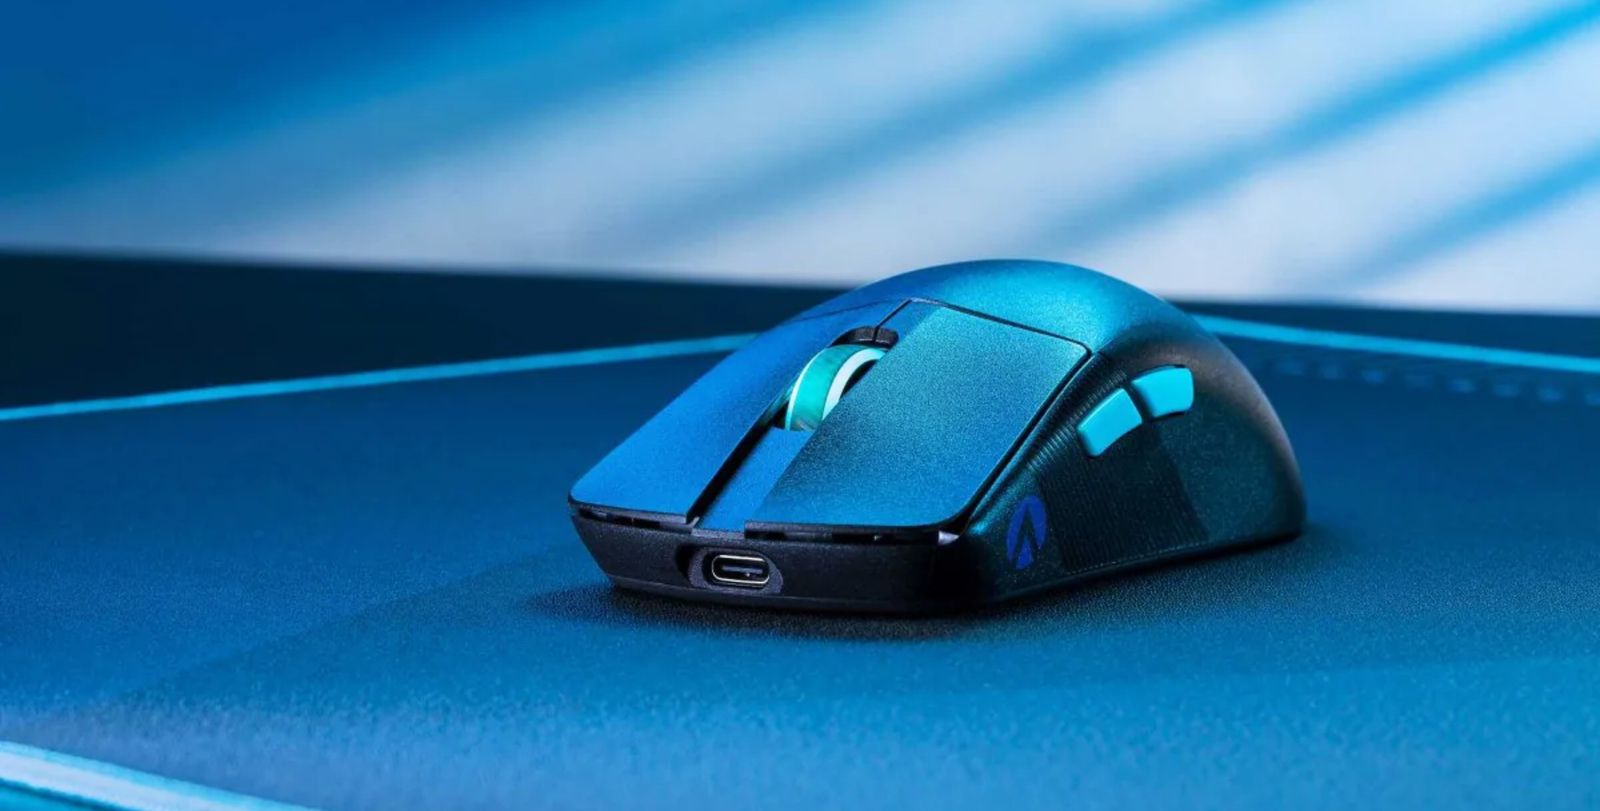 Image of a black, wireless ASUS mouse on a mousepad in a blue lit room.